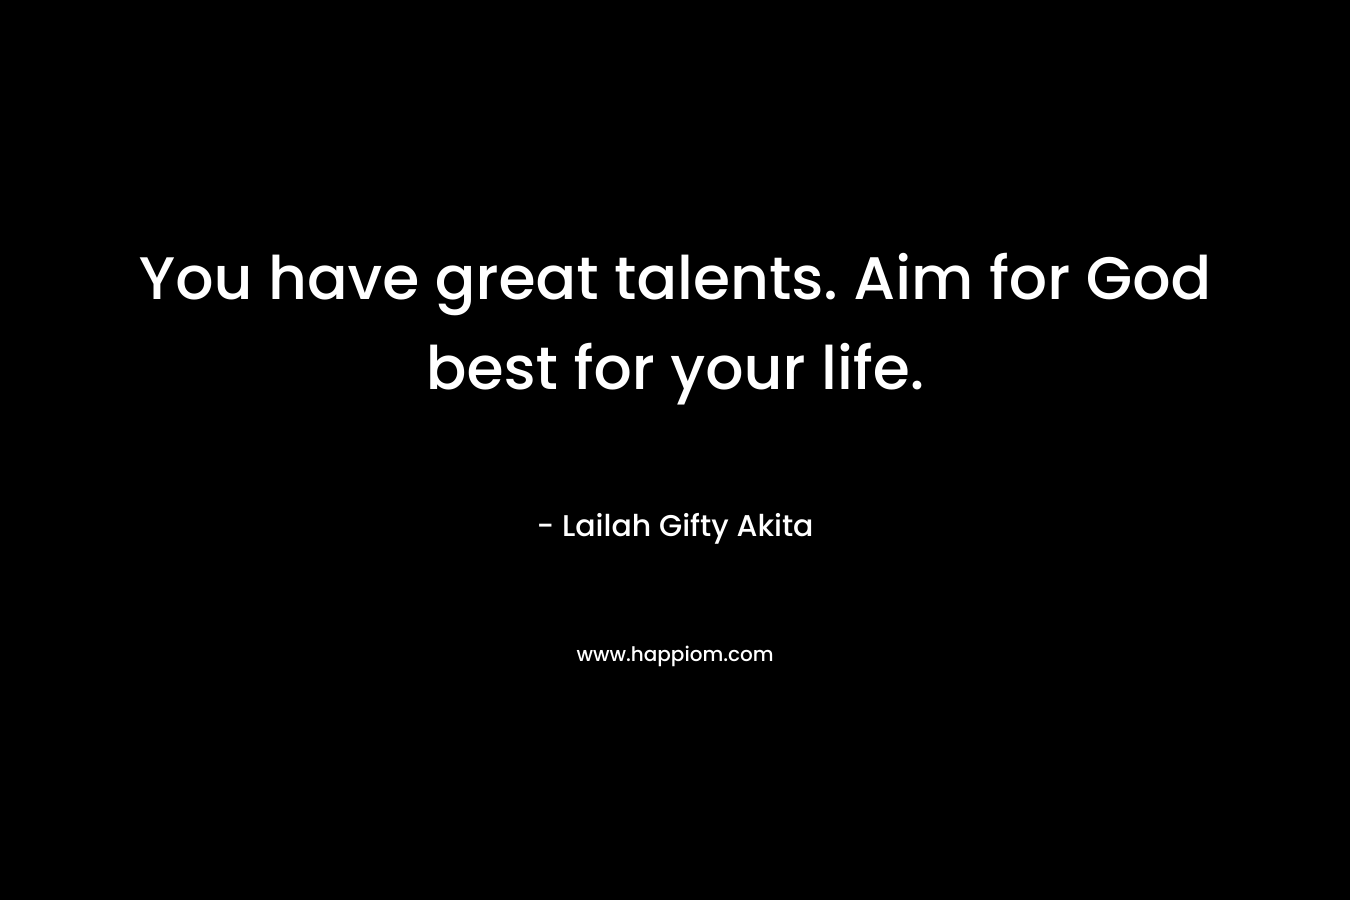 You have great talents. Aim for God best for your life.